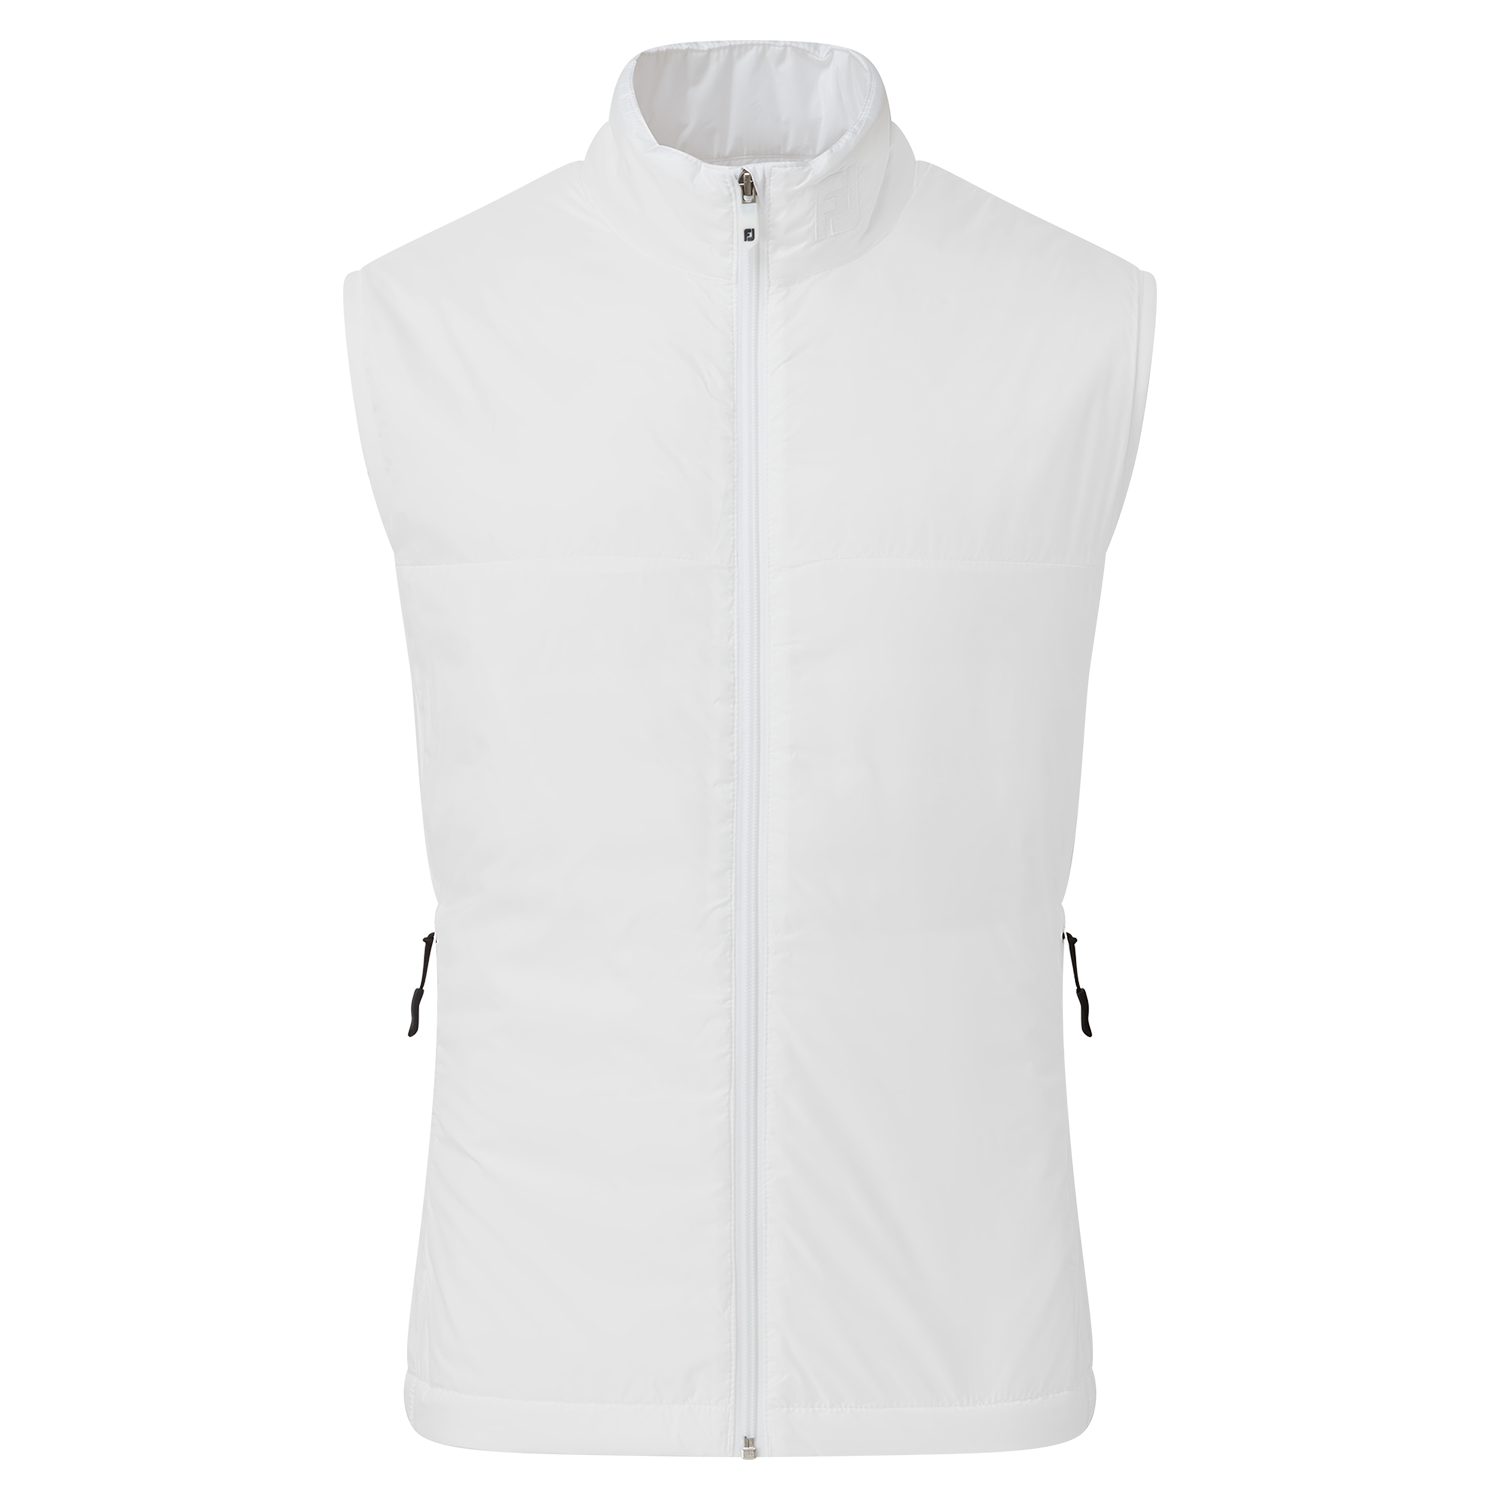 FootJoy Lightweight Insulated Thermal Vest